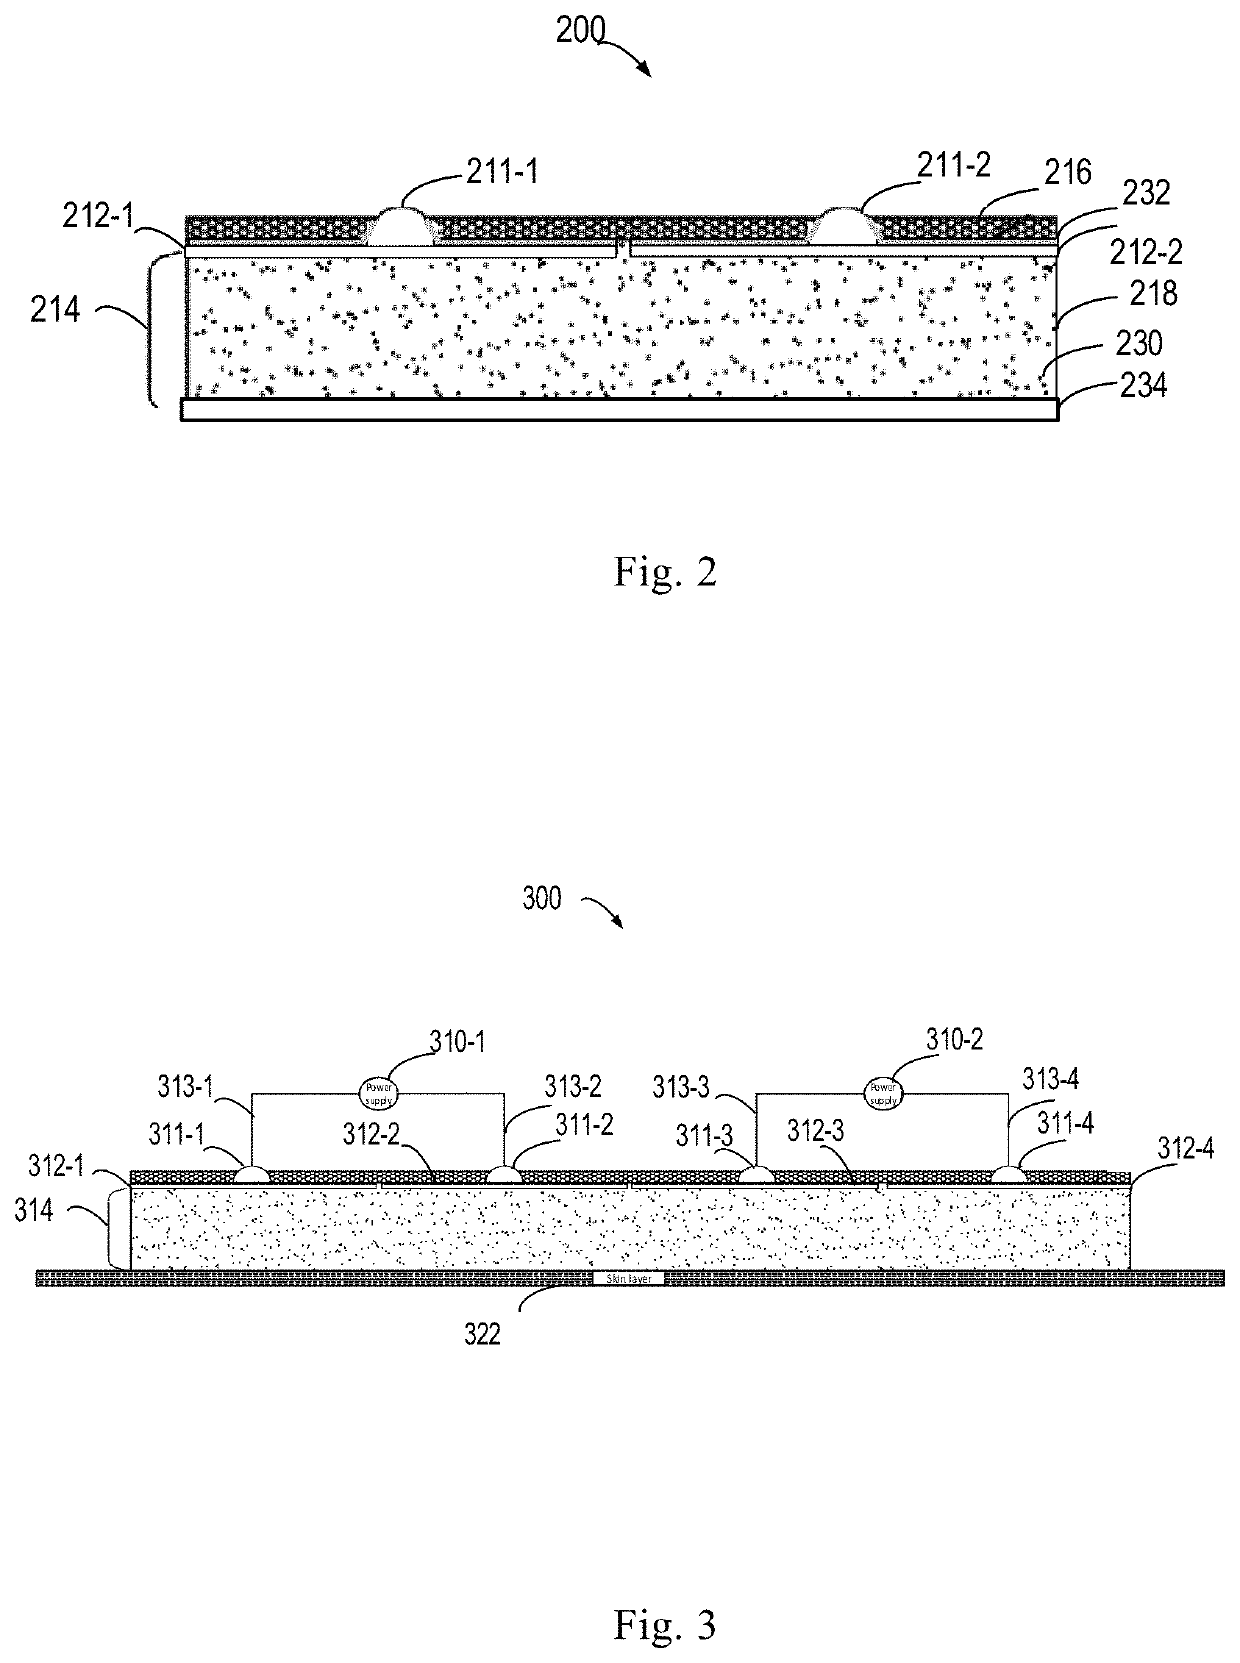 Iontophoresis administration device